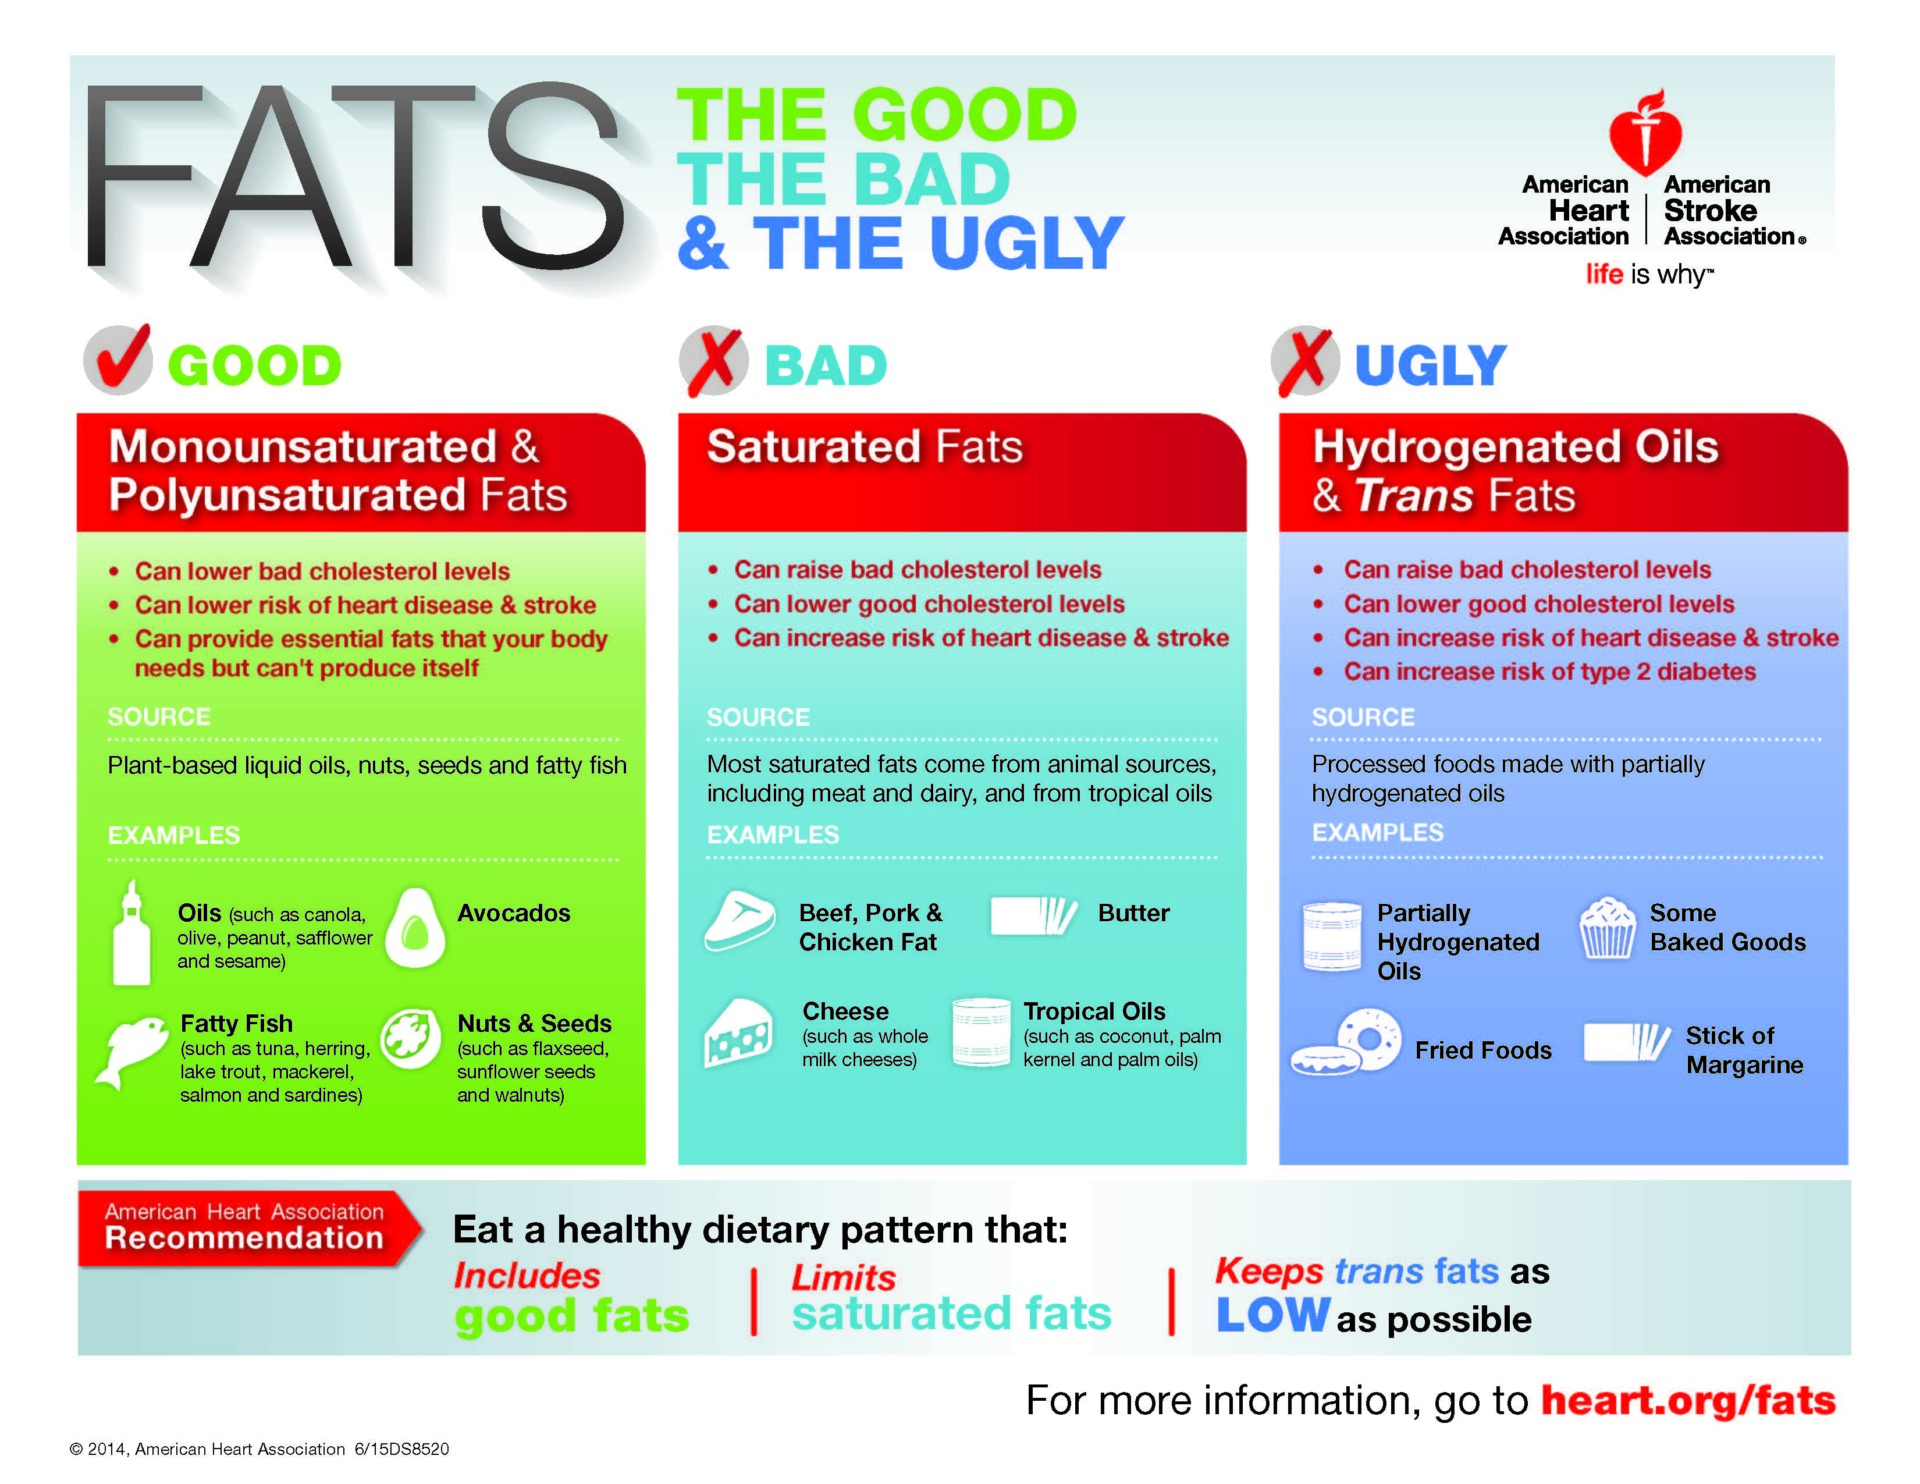 Fat intake and polyunsaturated fats